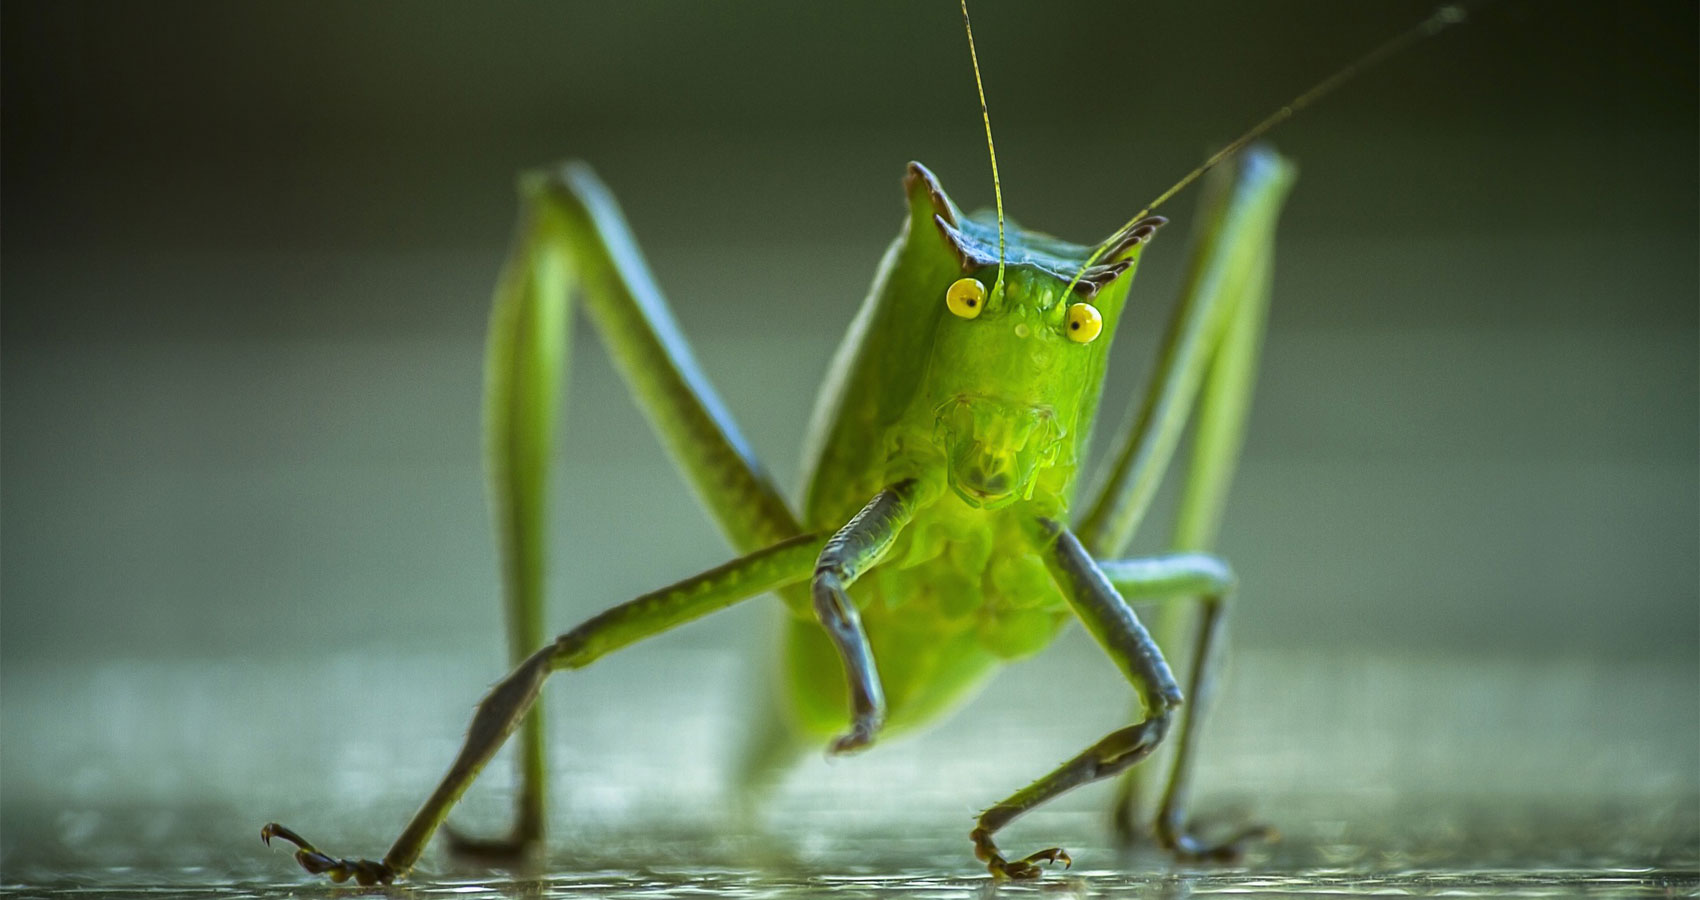 Crickets And Her written by Danielle Chua at Spillwords.com